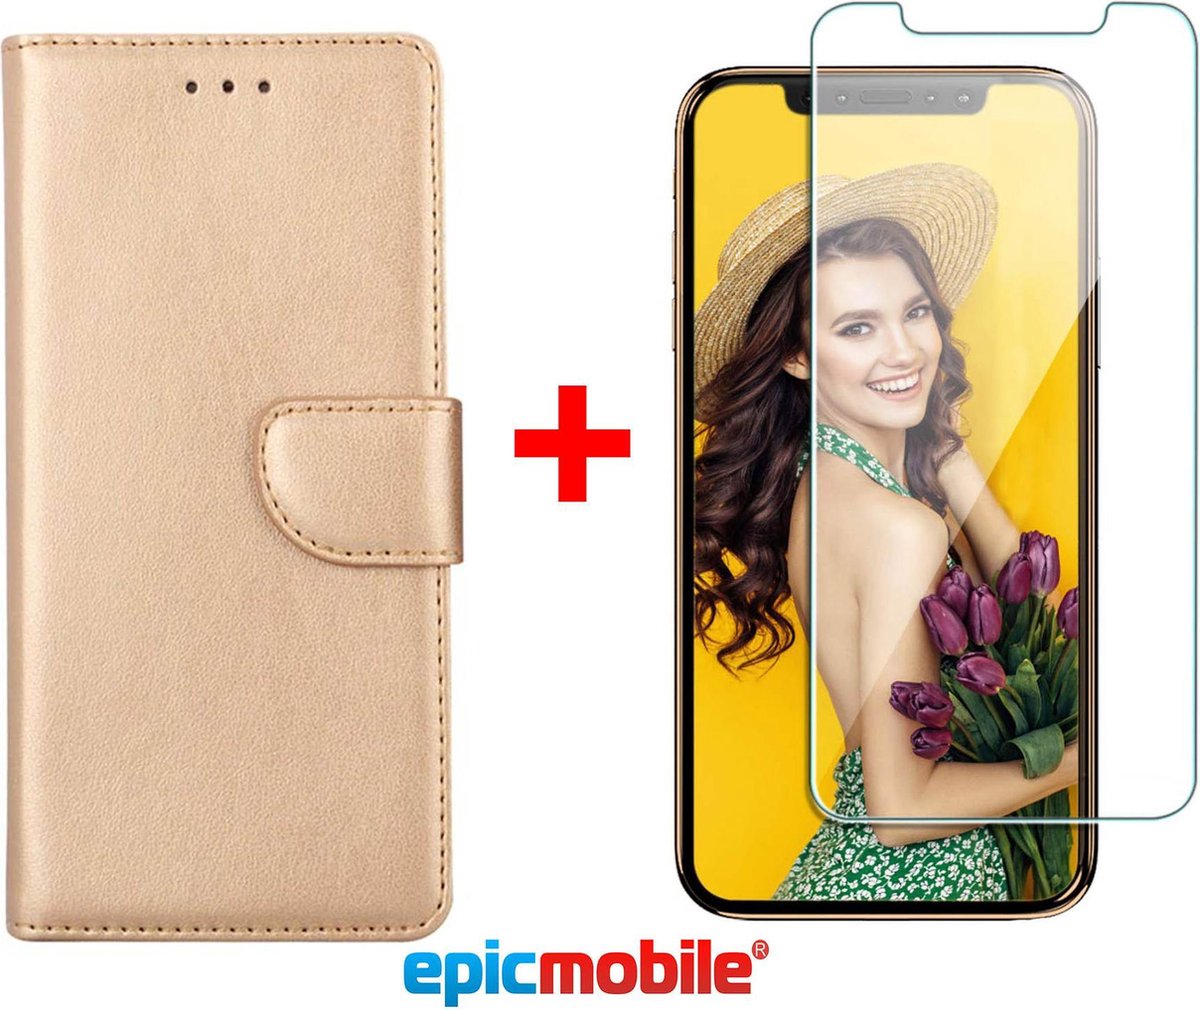 Epicmobile - iPhone 11 book case - deluxe portemonnee hoesje + Screenprotector - 9H tempered glass - Goud